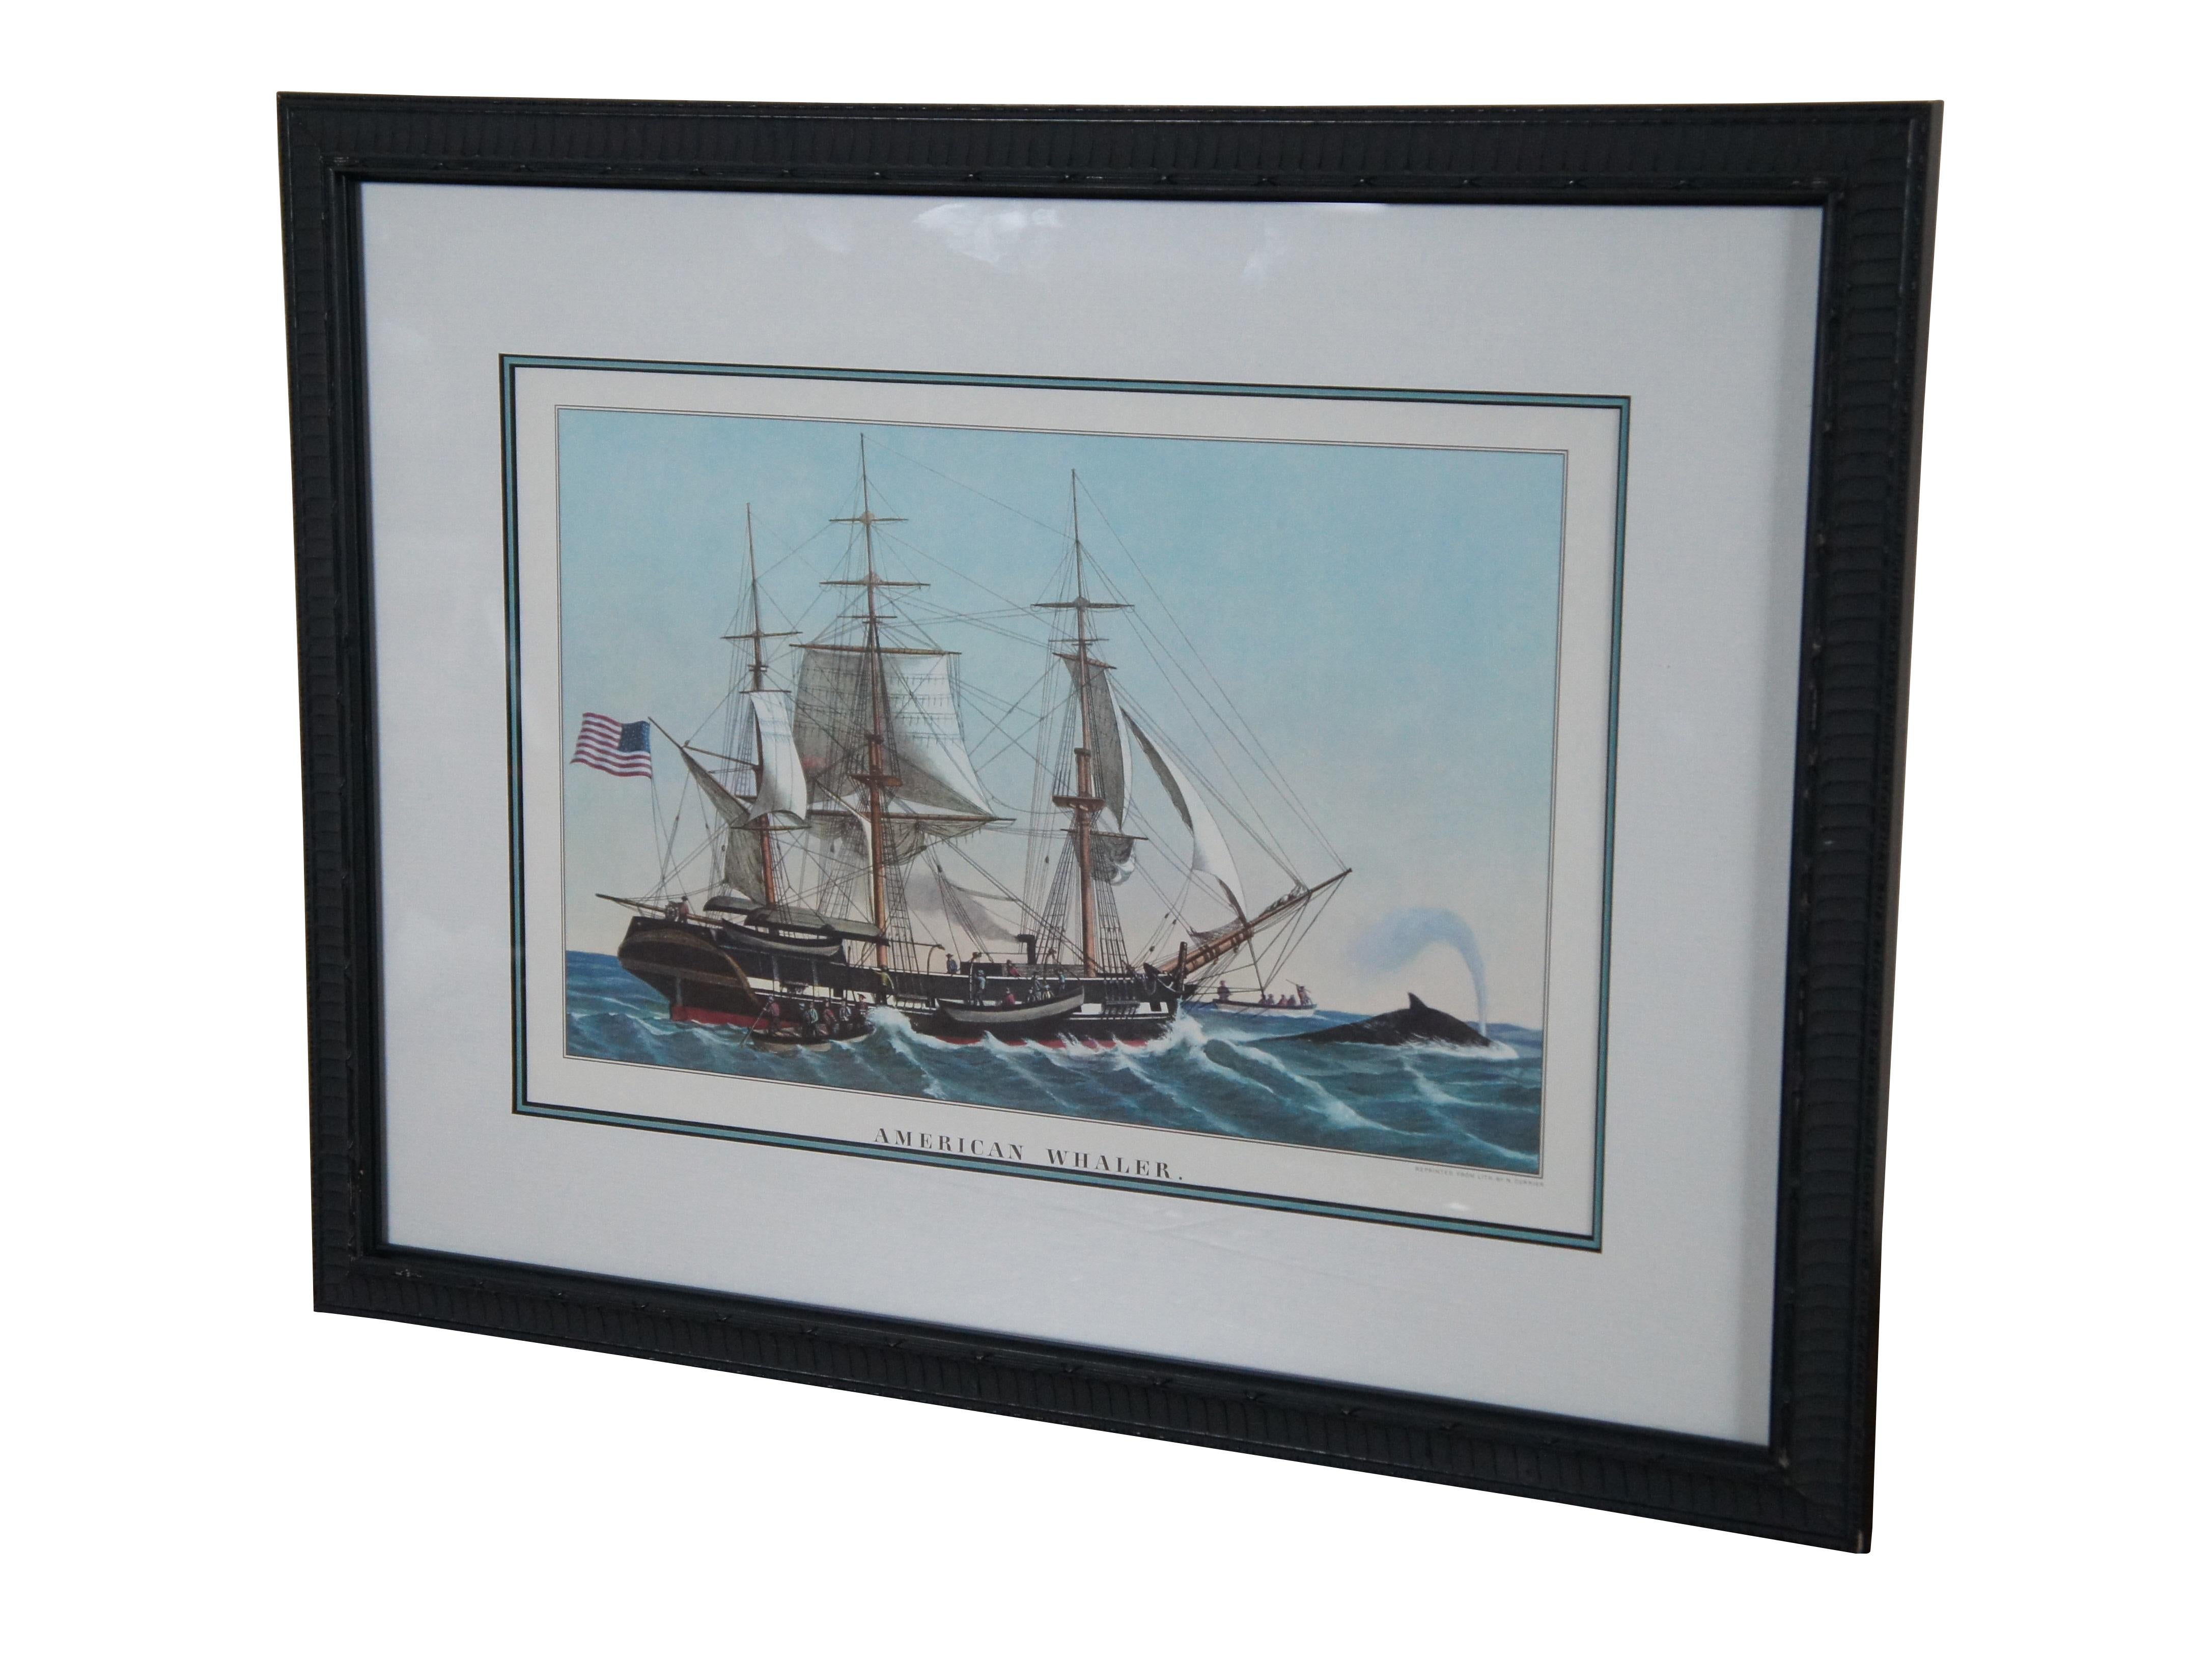 Vintage framed print of “American Whaler,” reprinted from an 1850s lithograph by Nathaniel Currier, showing an American sailing ship / galleon hunting a whale.  Professionally framed and matted.

Currier and Ives was a printmaking business in New